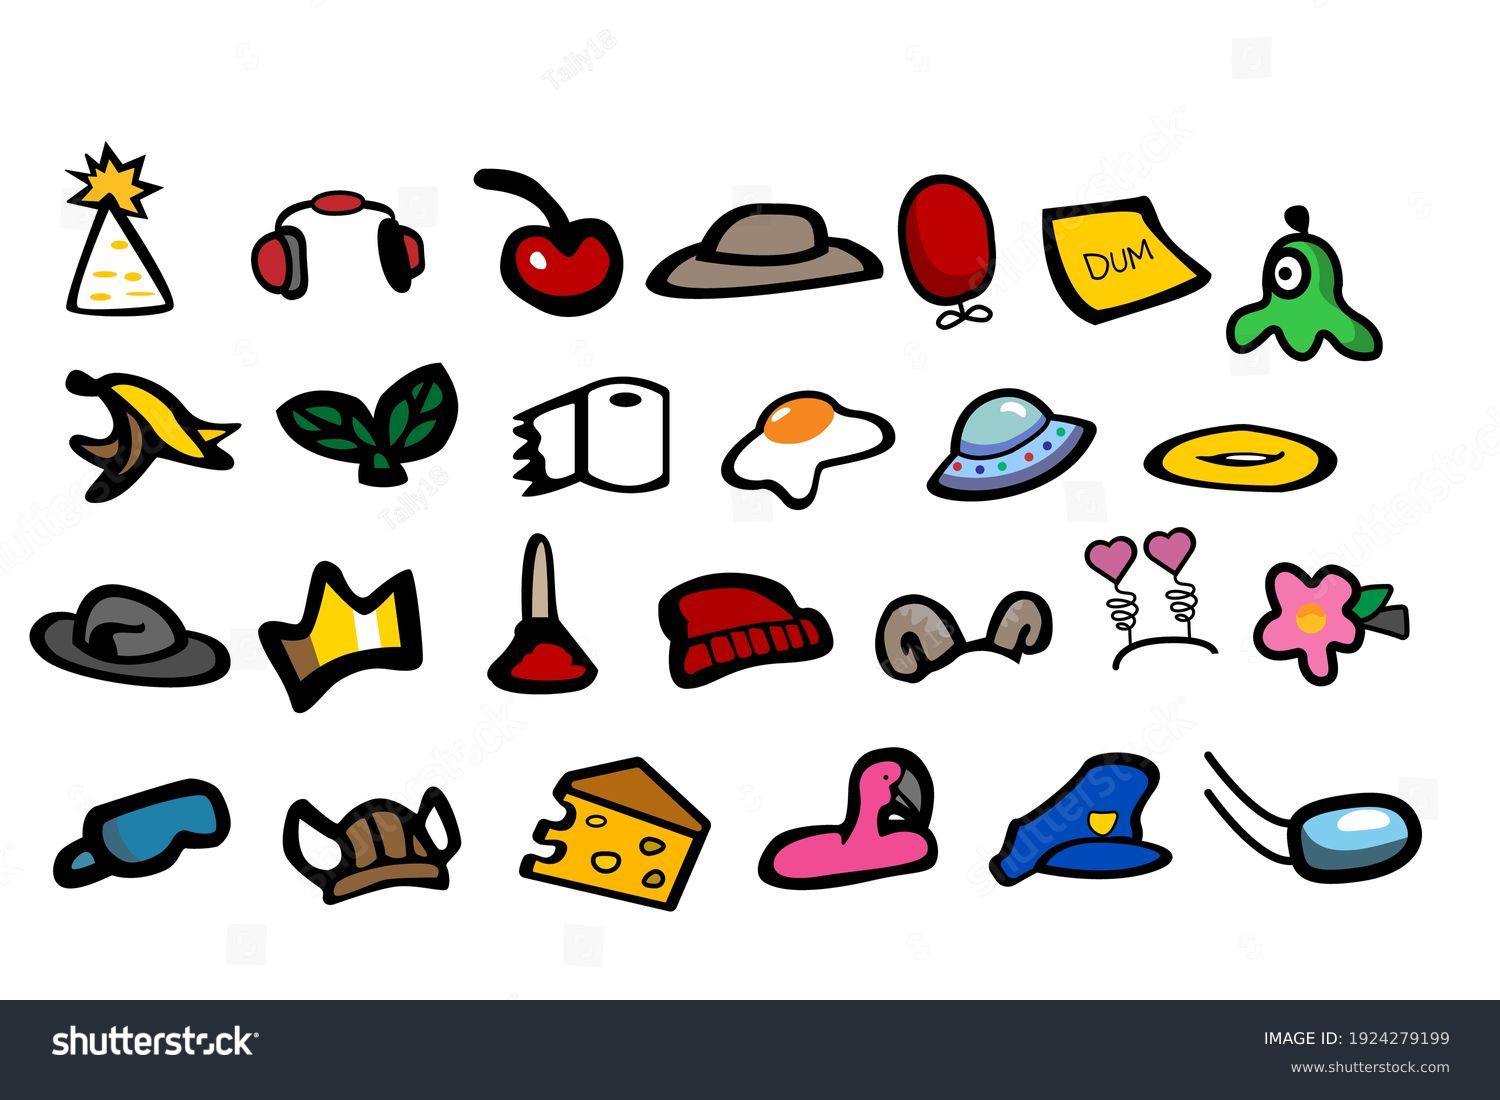 327 among us characters images stock photos vectors shutterstock